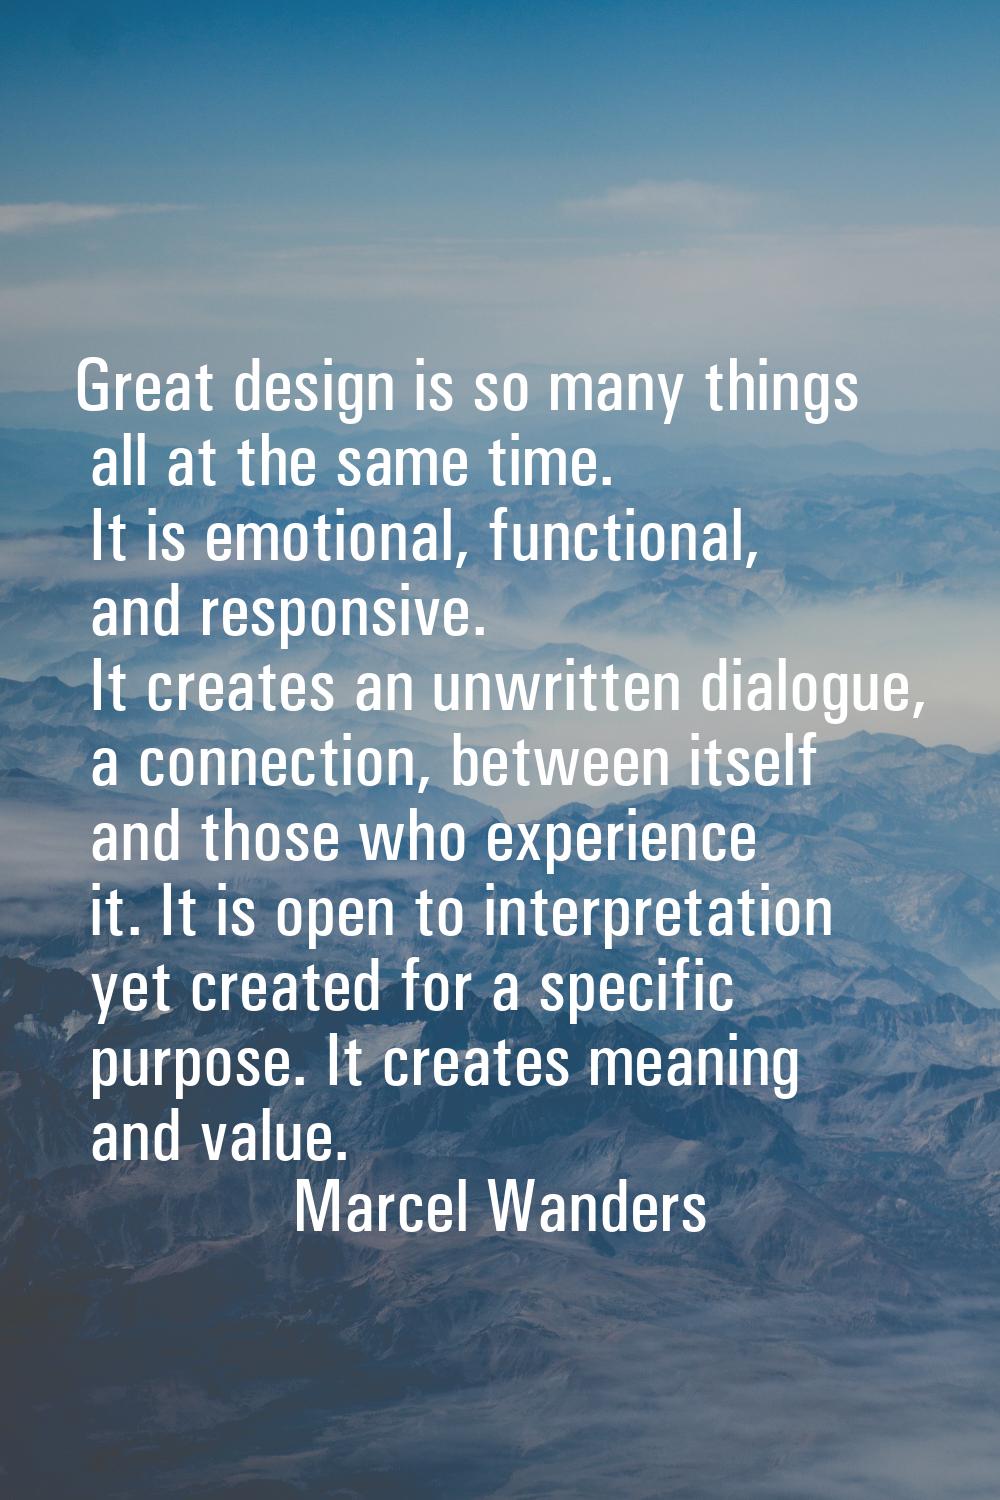 Great design is so many things all at the same time. It is emotional, functional, and responsive. I